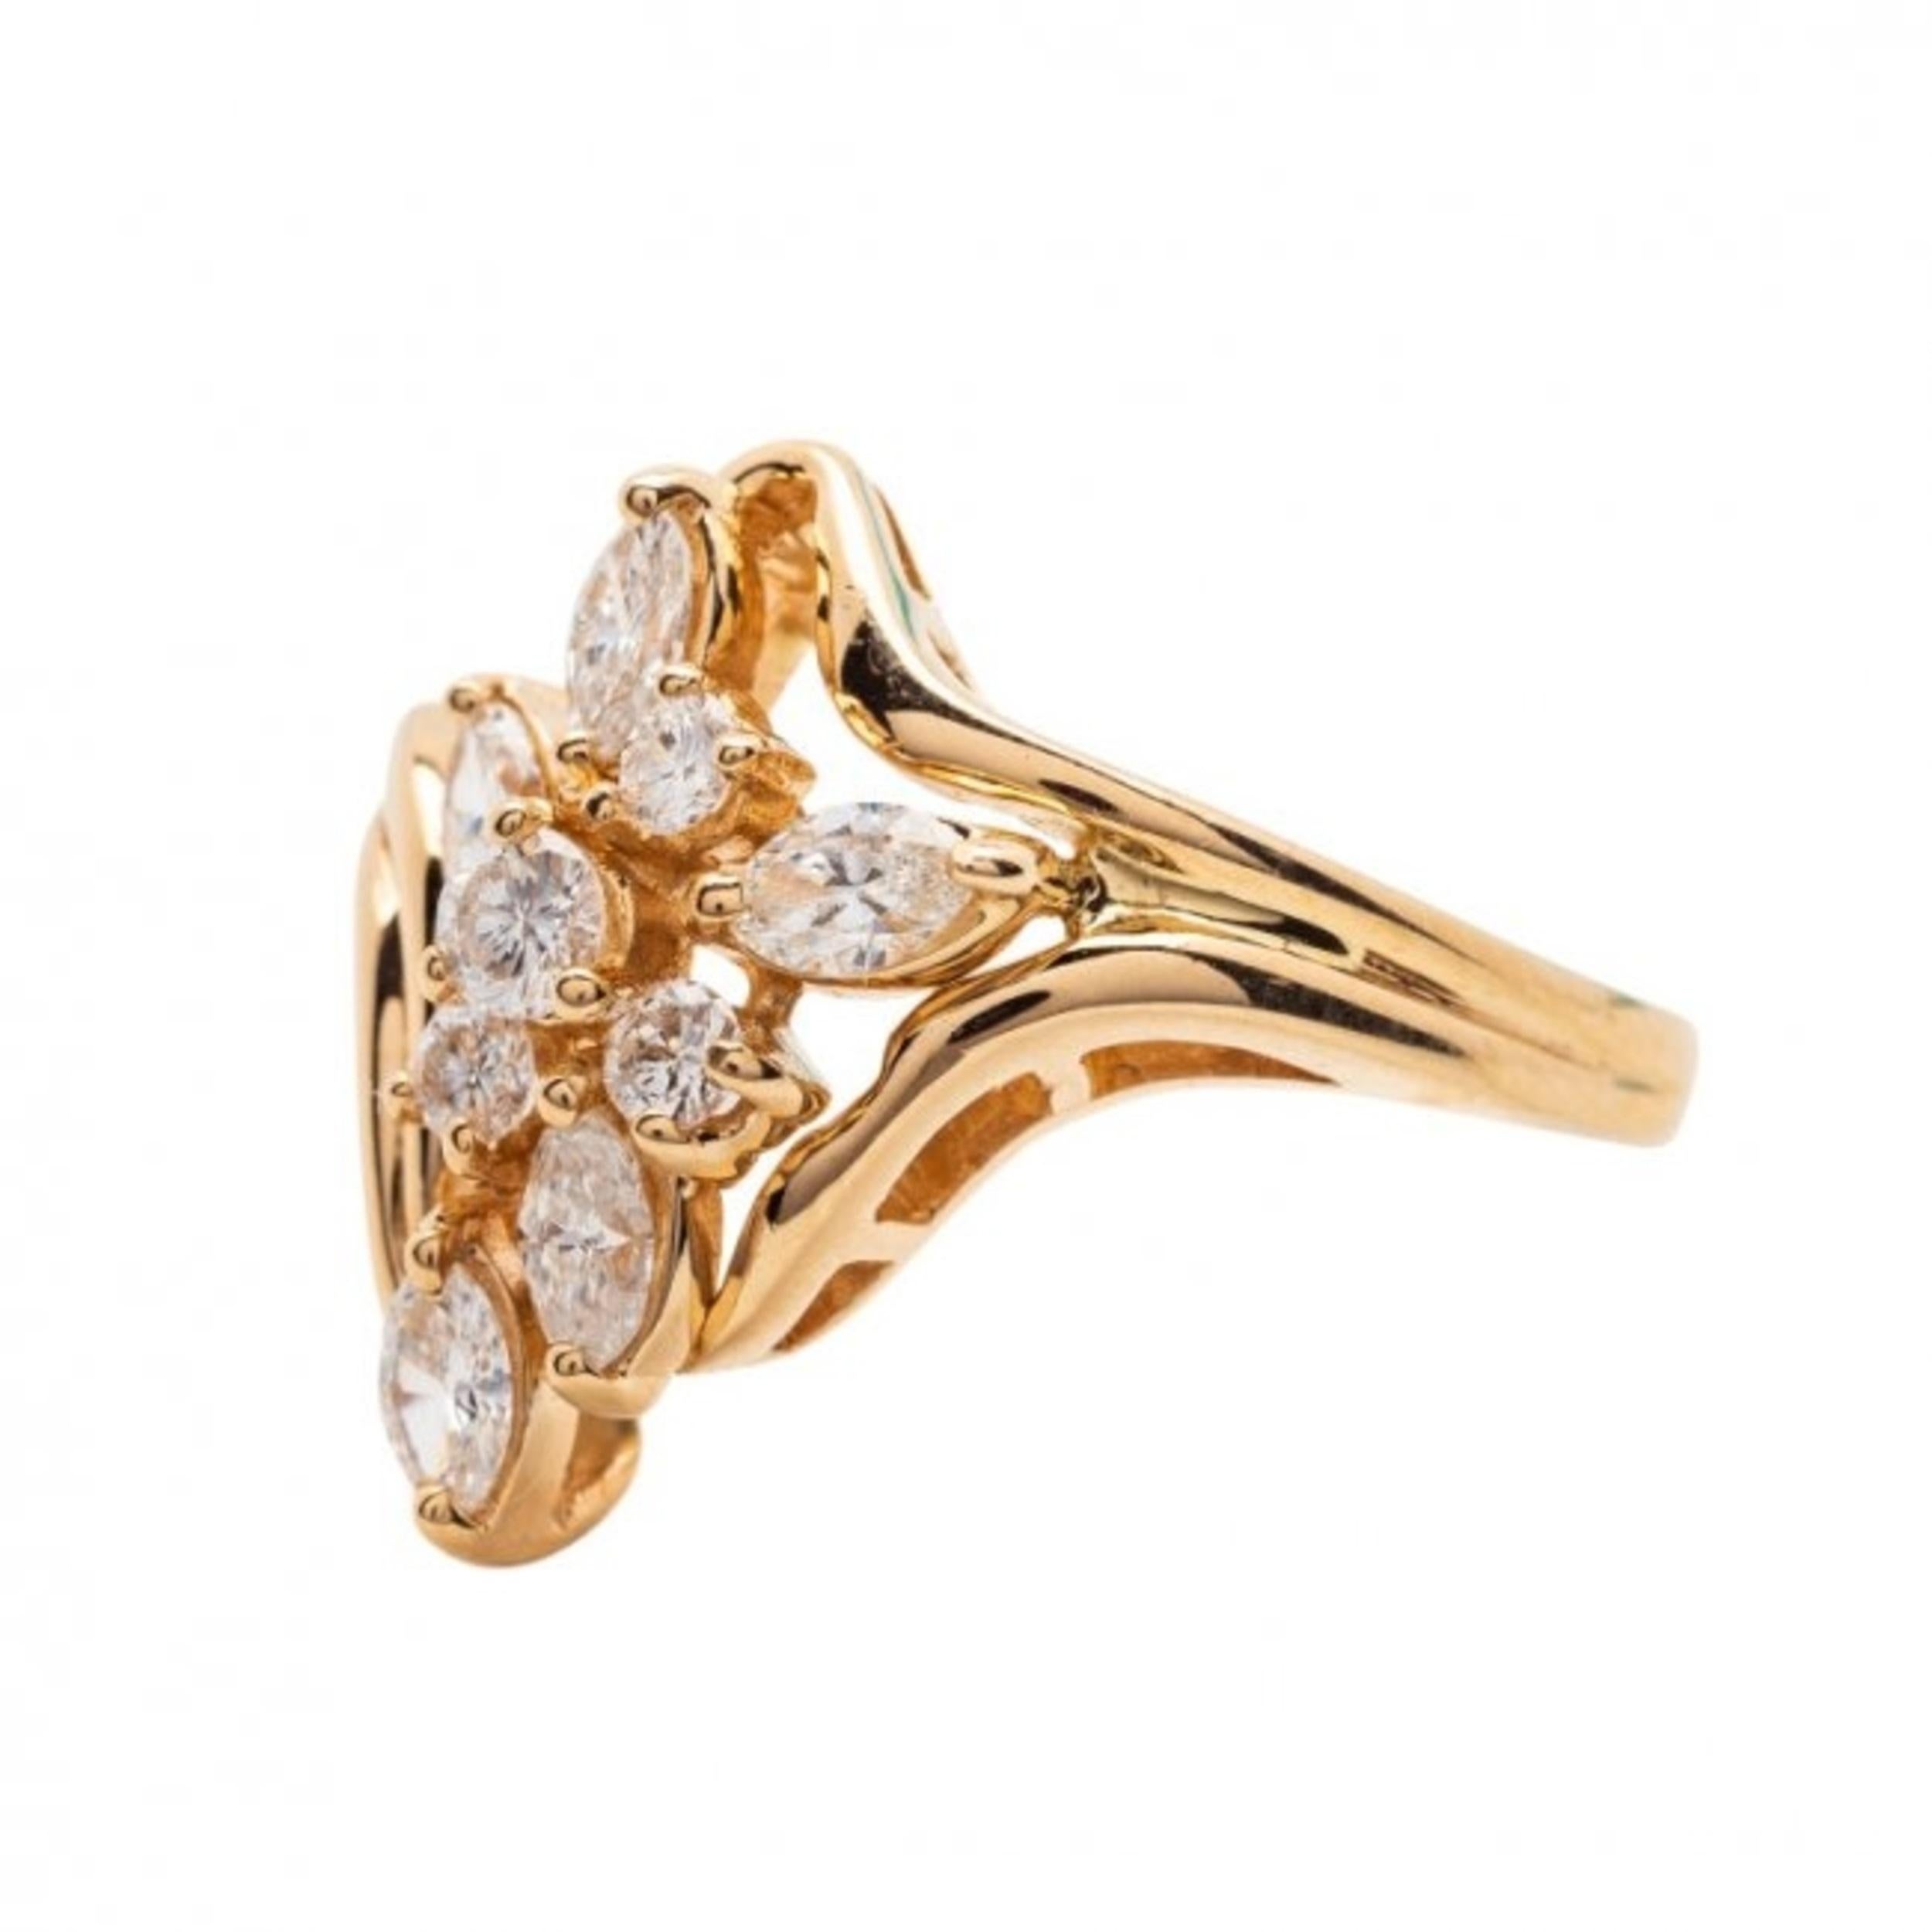 Beautiful Gold and Diamond Ring, signed Trev
14 Karat Yellow Gold and Diamonds
set with five marquise and four round-cut diamonds weighing approximately 0.75 ct. 
6.7 grams, size 7 1/4